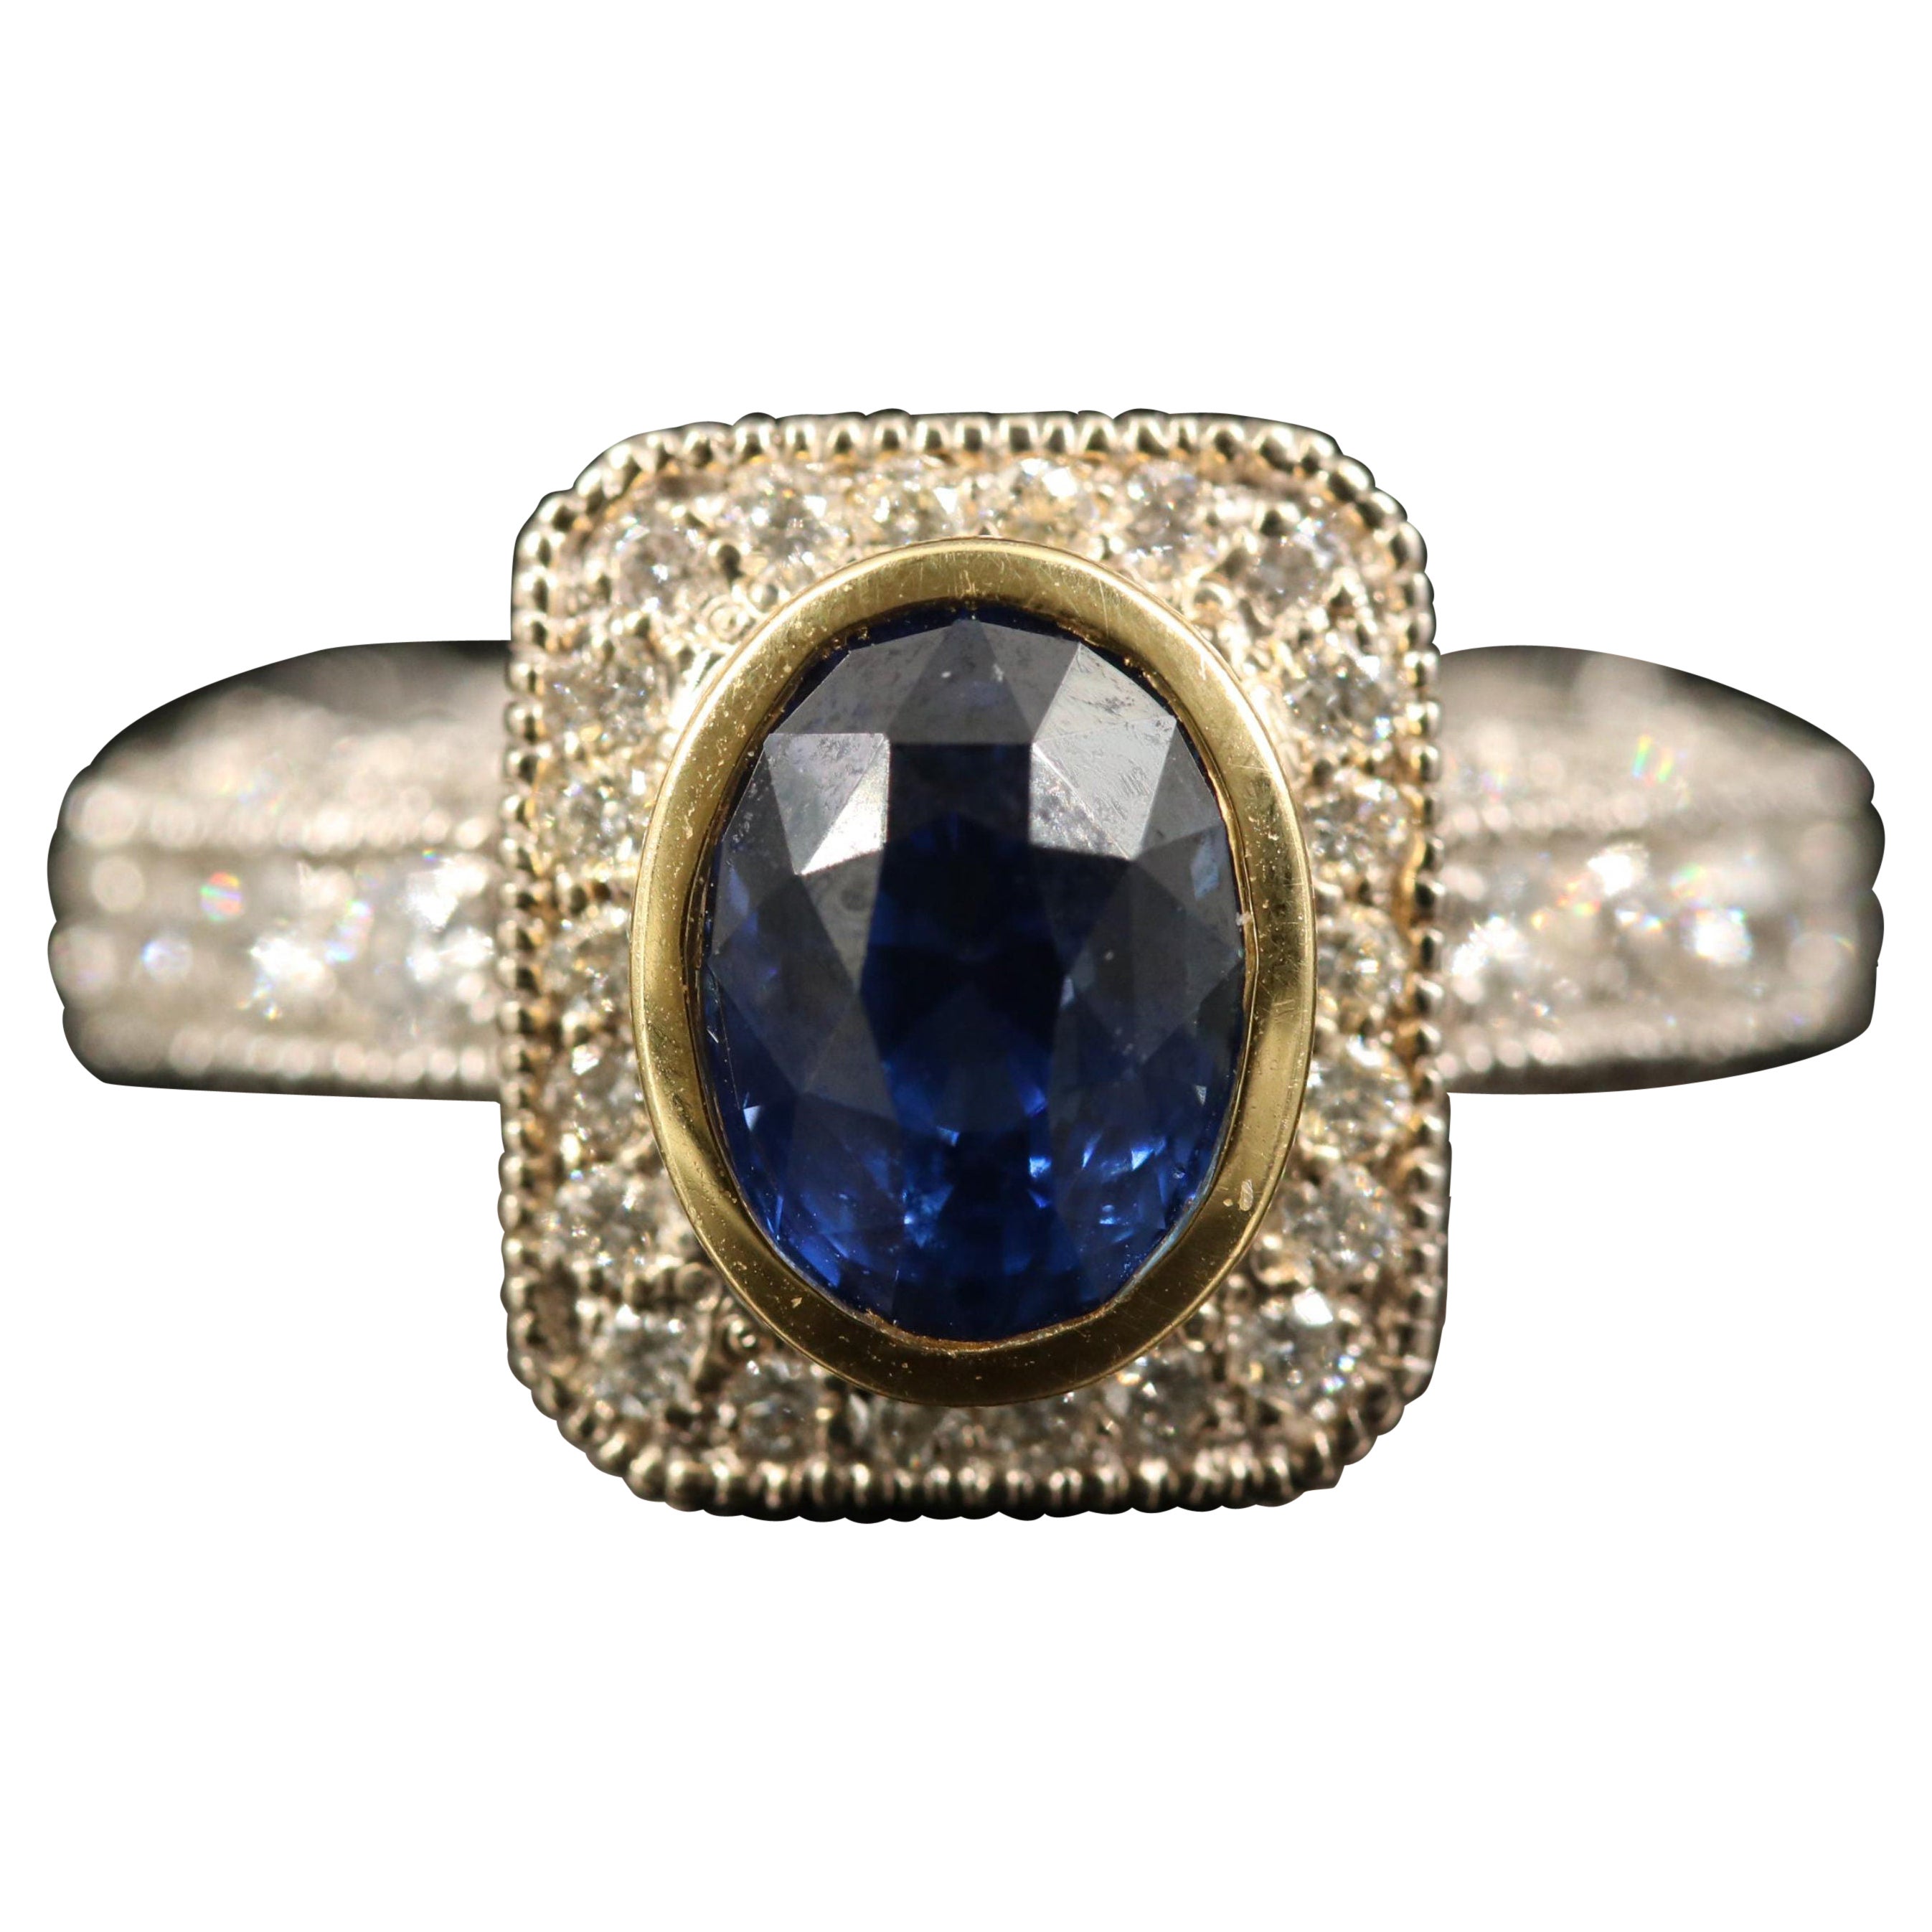 3.29 CT Sapphire and Diamond Engagement Ring, 18K White Gold Sapphire Ring